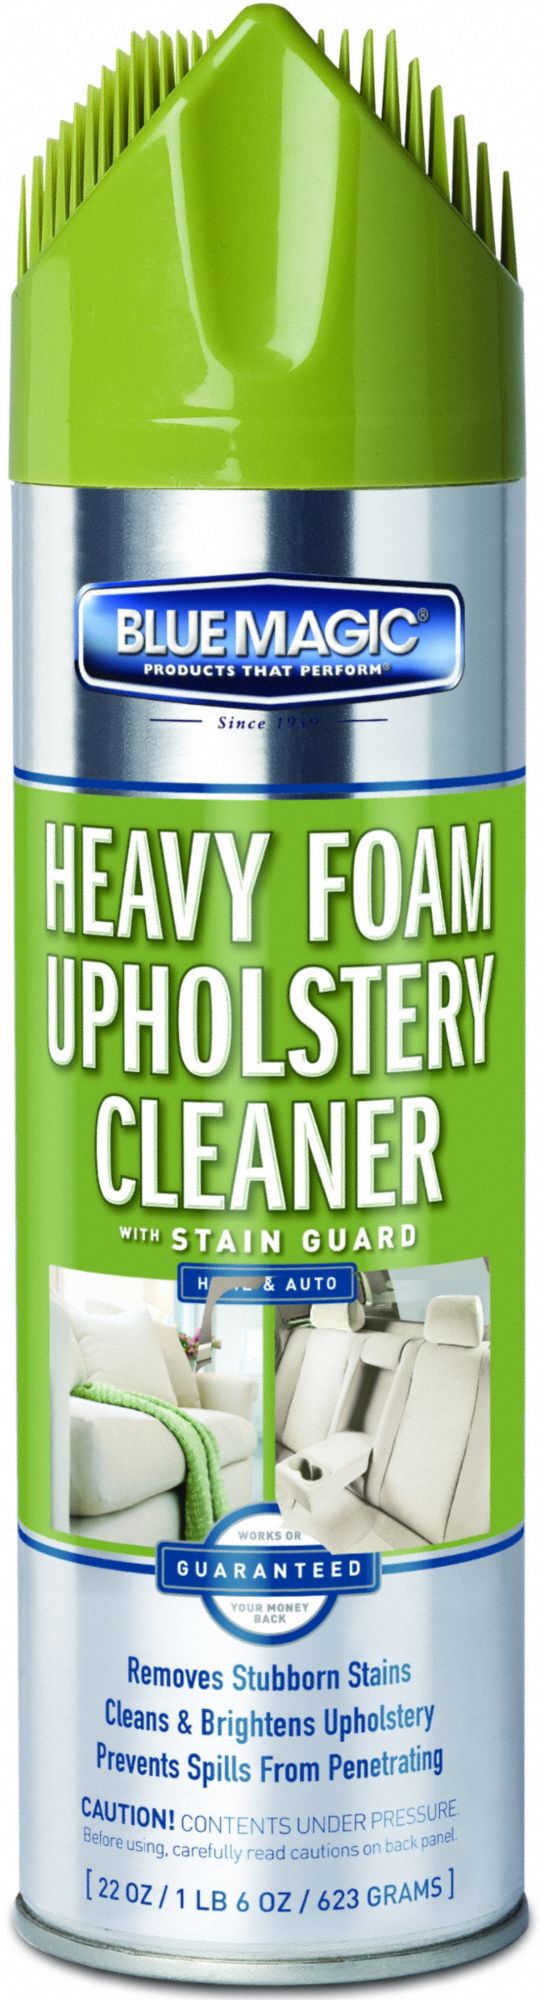 BLUE MAGIC, Water, Aerosol, Foam Upholstery Cleaner with Stain